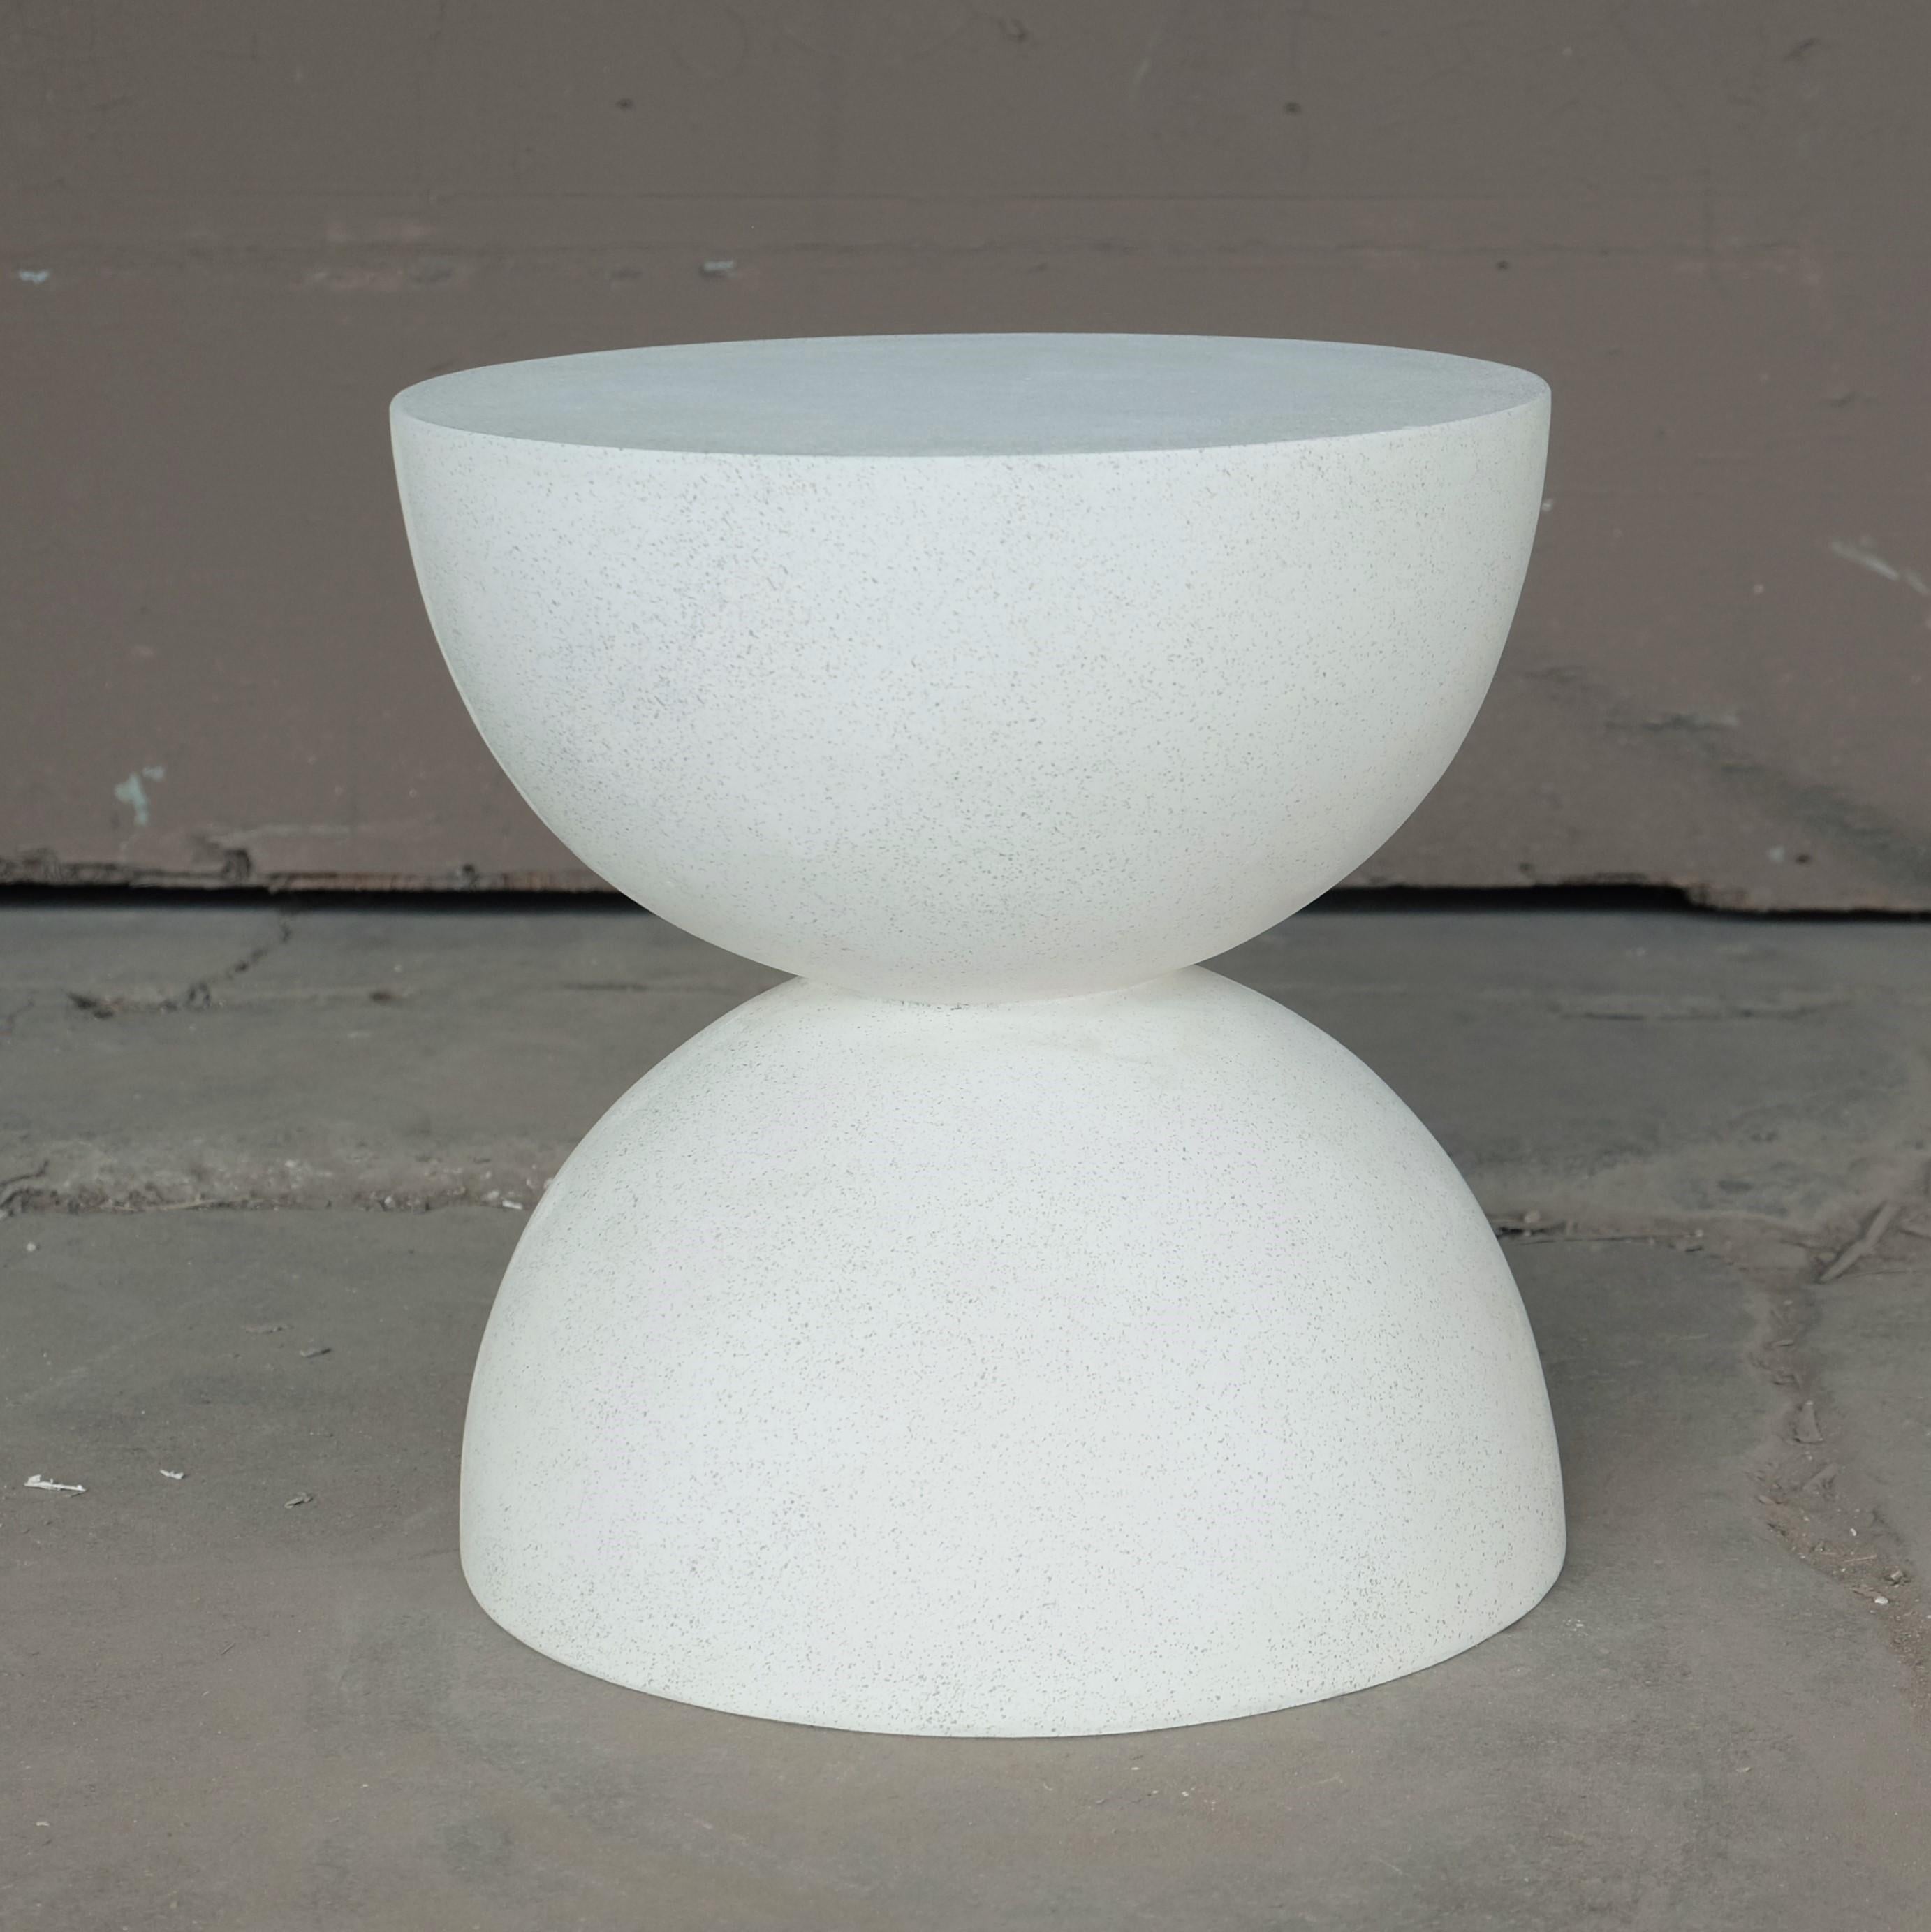 A symmetrical sculptural balance of elegance and function.

Dimensions: Diameter 15 in. (38 cm). Height 16 in. (40.6 cm). Weight 20 lbs. (9 kg)

Finish color options:
white stone (shown)
natural stone
aged stone
key stone
coal stone

Materials: